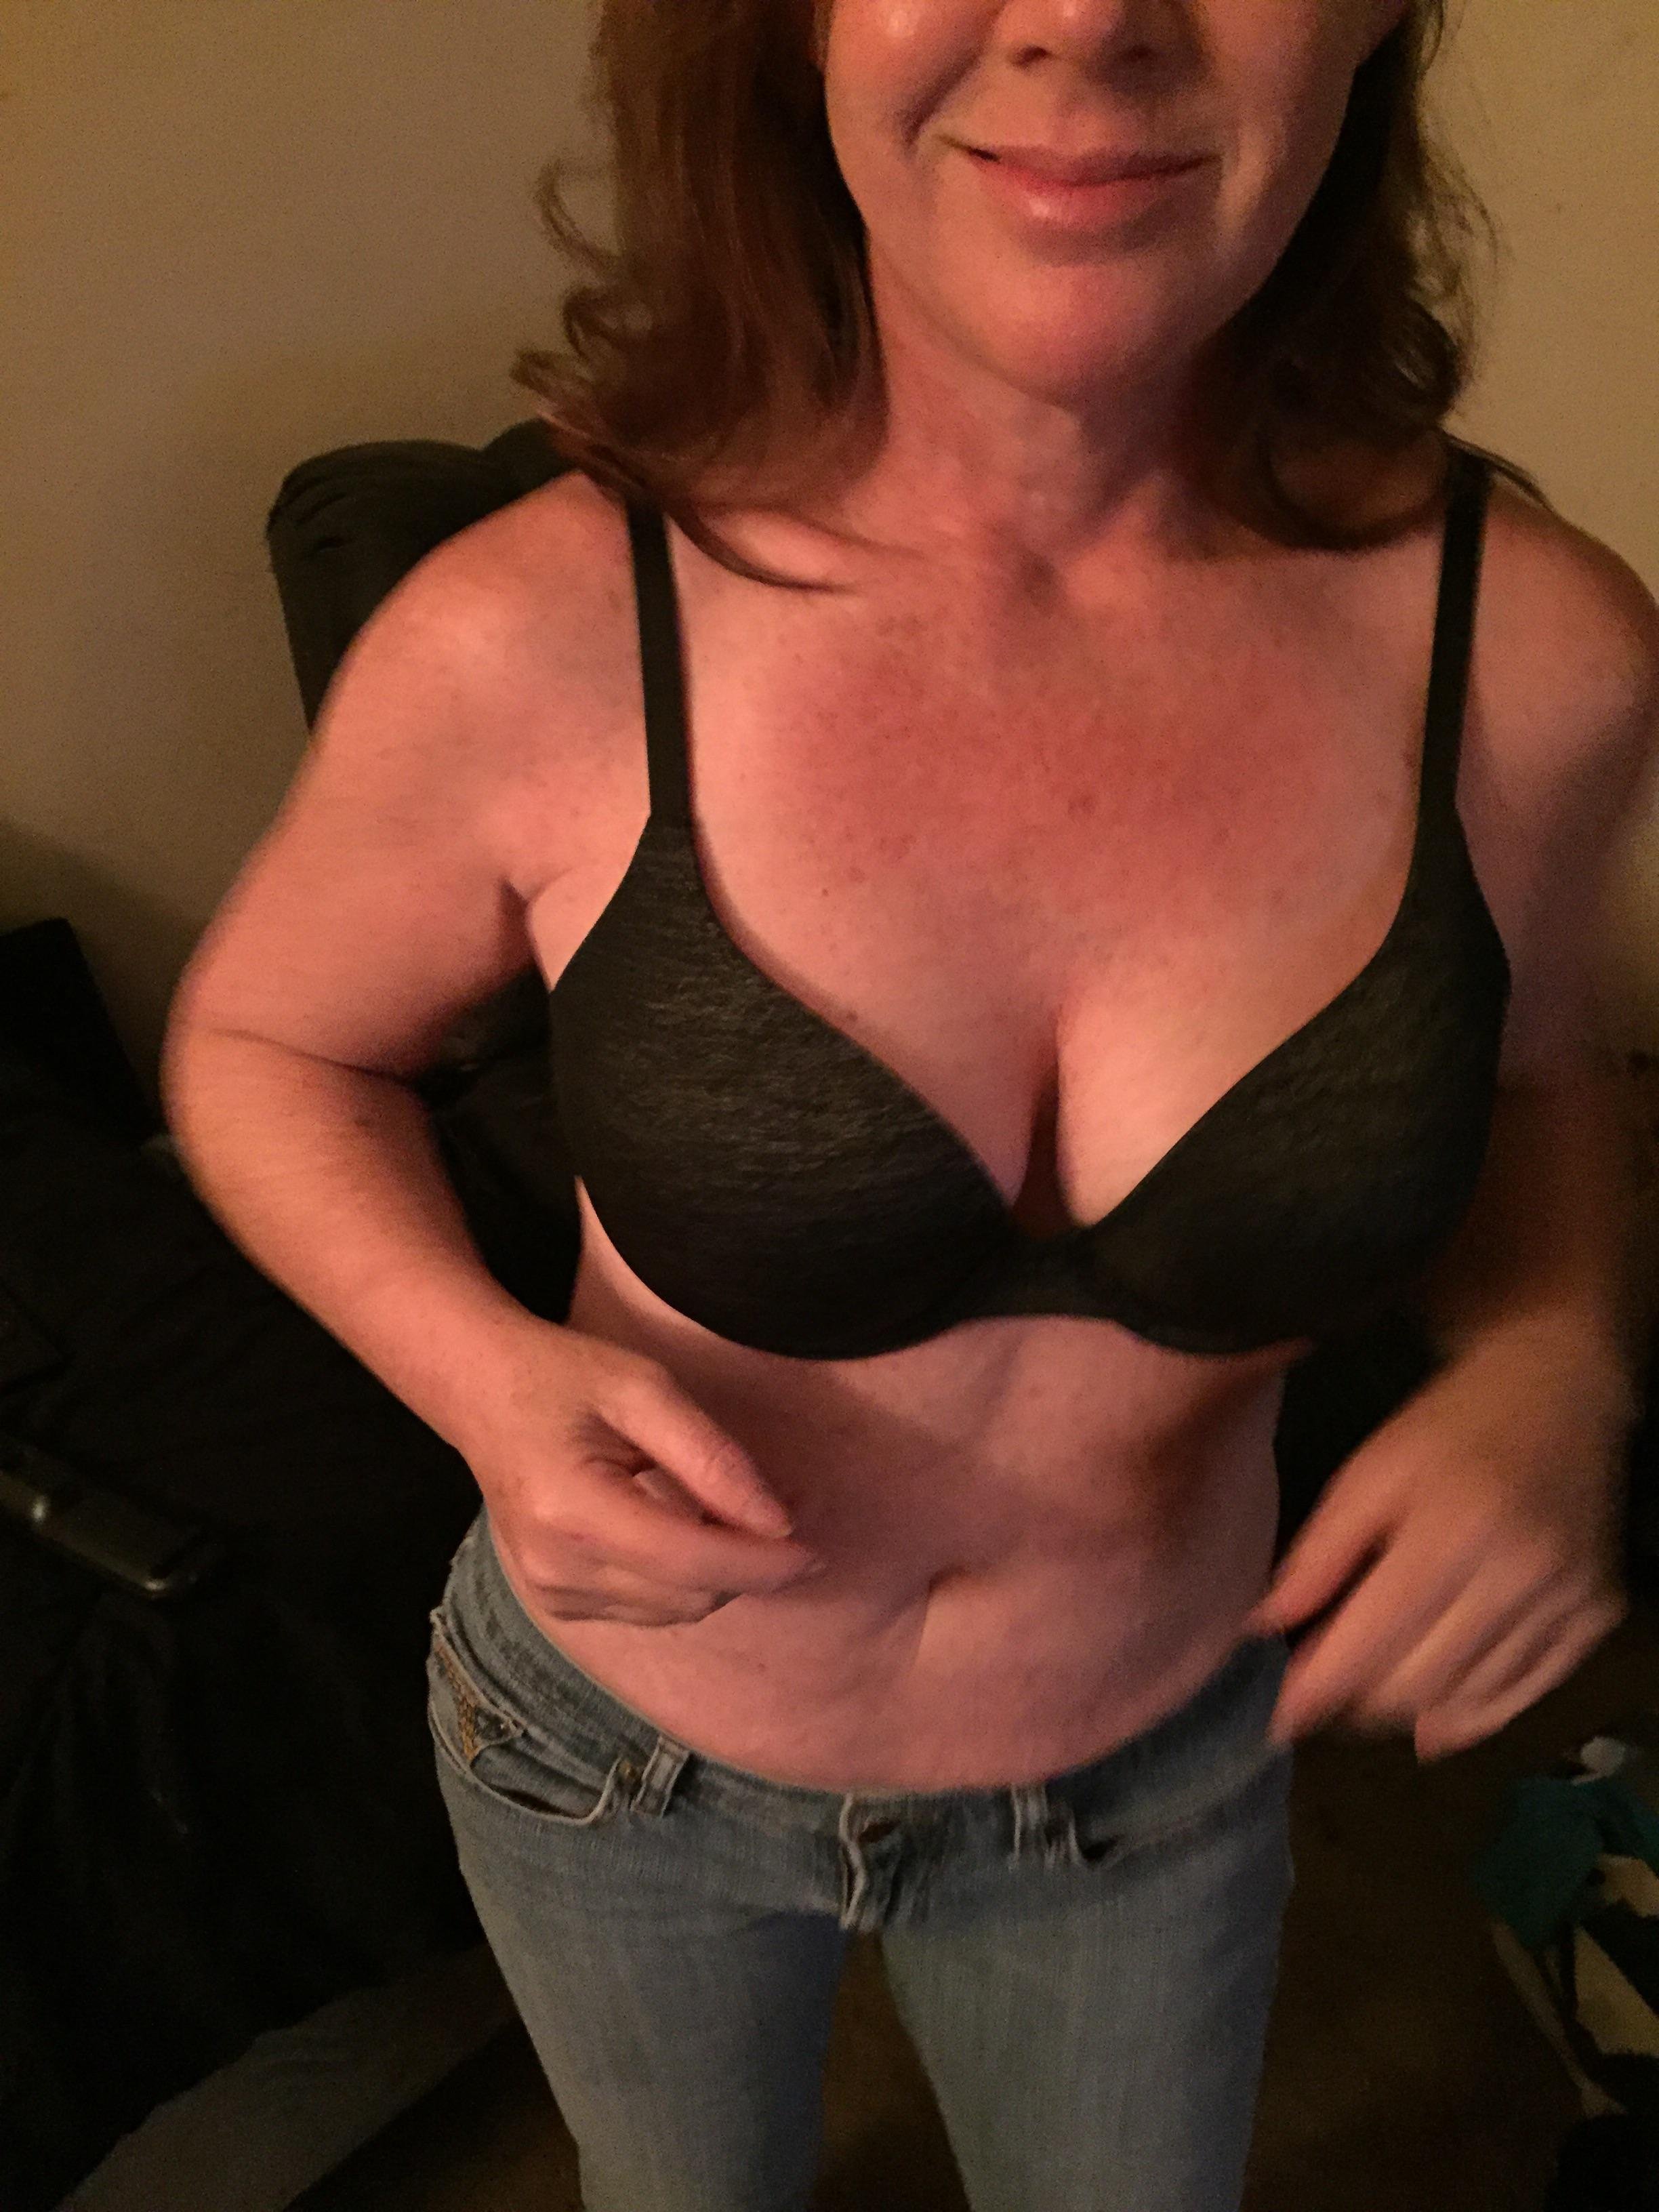 My sexy 49 year old cougar girlfriend came over to get a taste and (F)illed up Xb